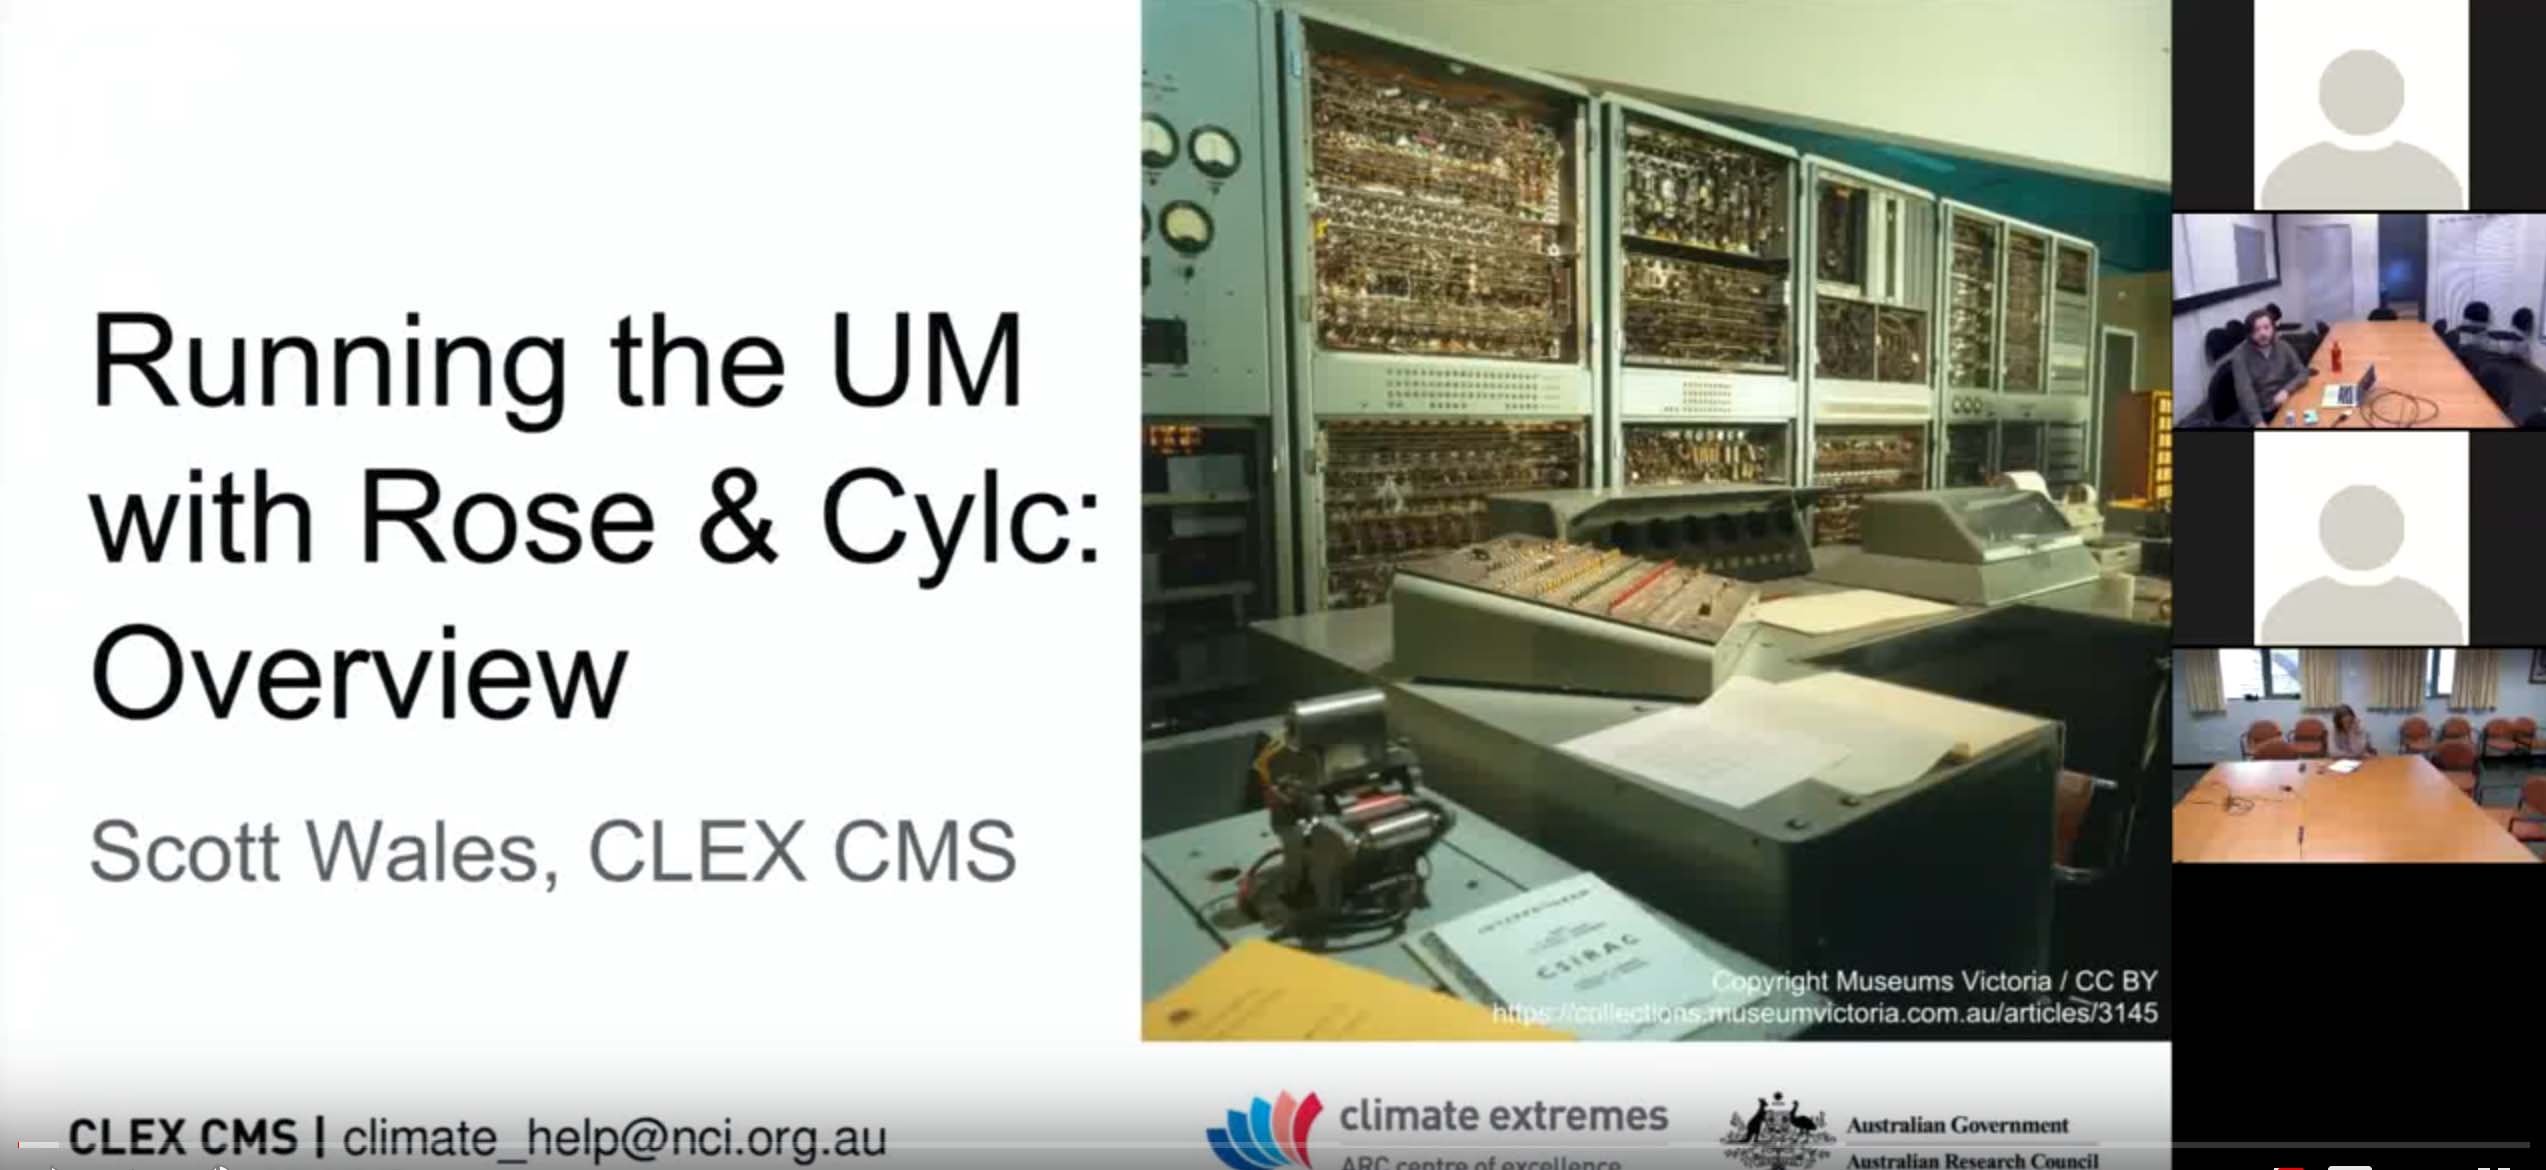 CMS training – running the UM with Rose and Cylc overview